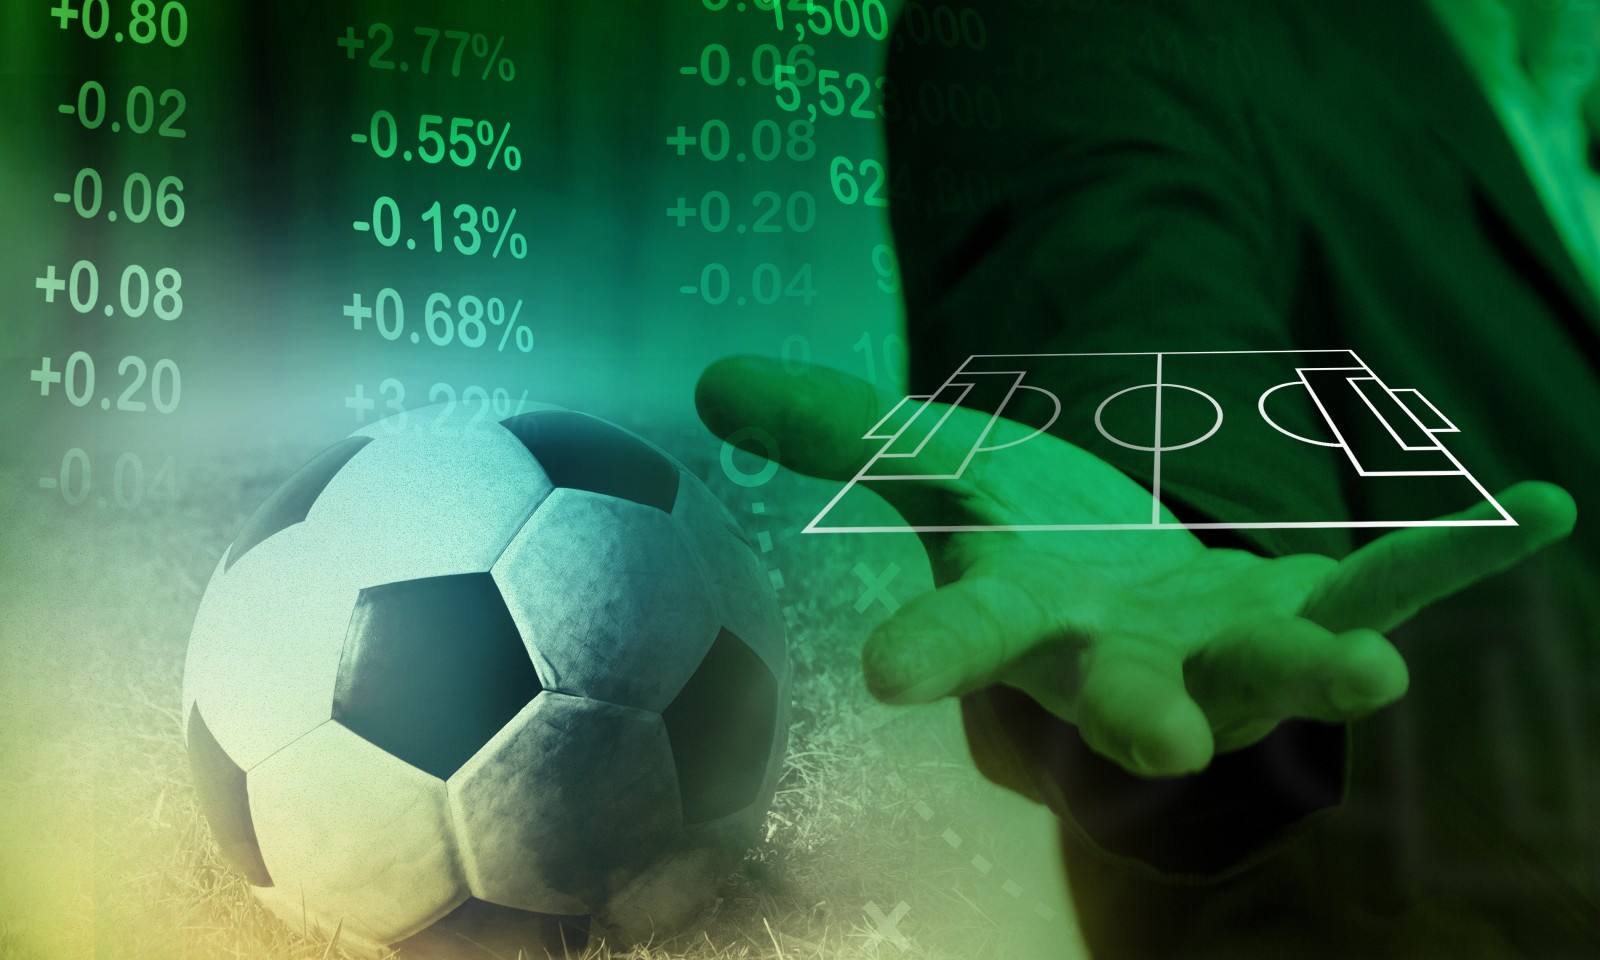 Why are statistics increasingly important in football today? Scanlite